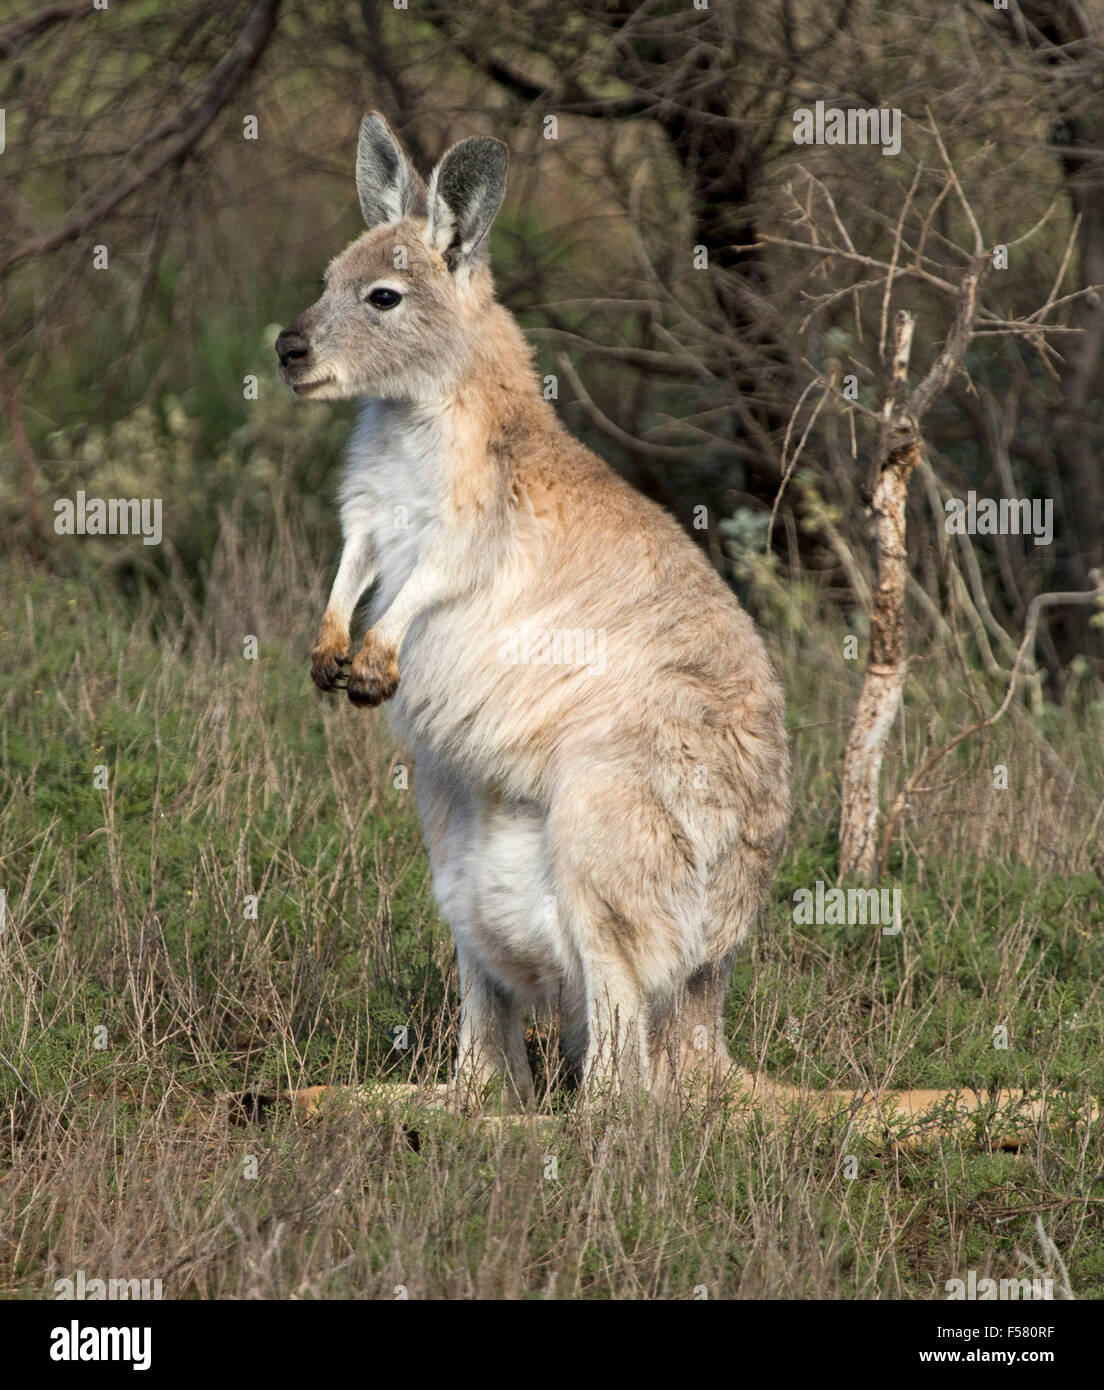 Beautiful female wallaroo / euro, Macropus robustus, pouch extended with hidden joey, in Flinders Ranges outback Australia Stock Photo